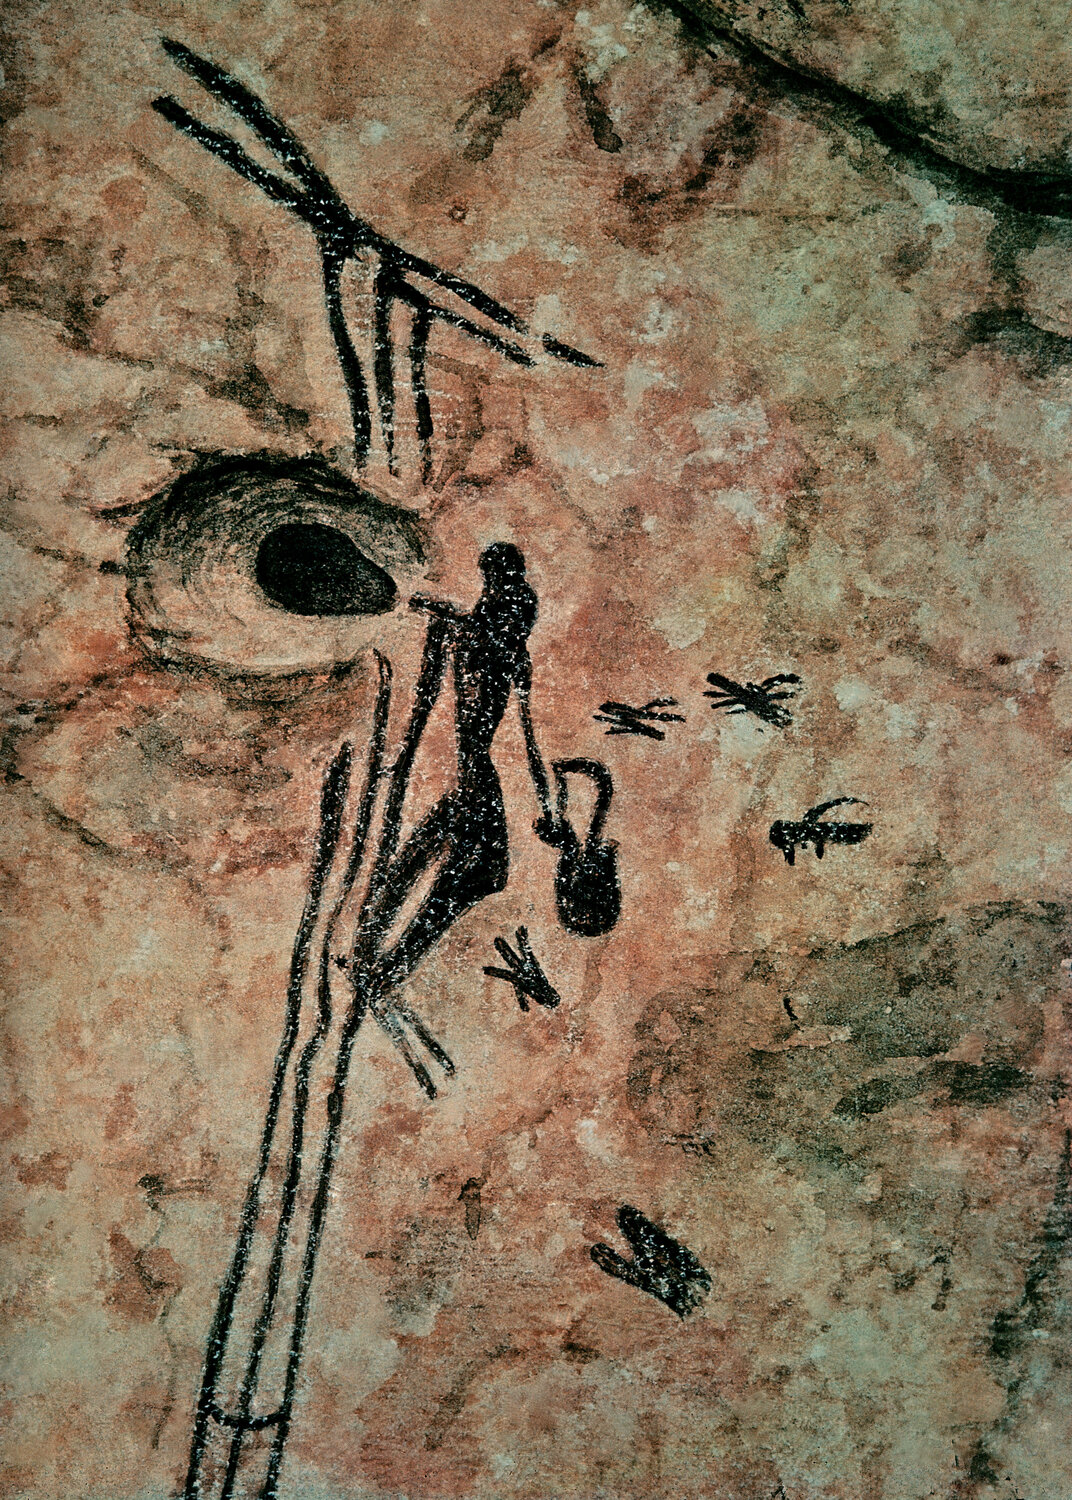 This cave painting of a person climbing a ladder to gather honey was discovered in the early 20th century near Valencia, Spain, and dates back at least 8,000 years. (Source: Alamy Images with permission) 